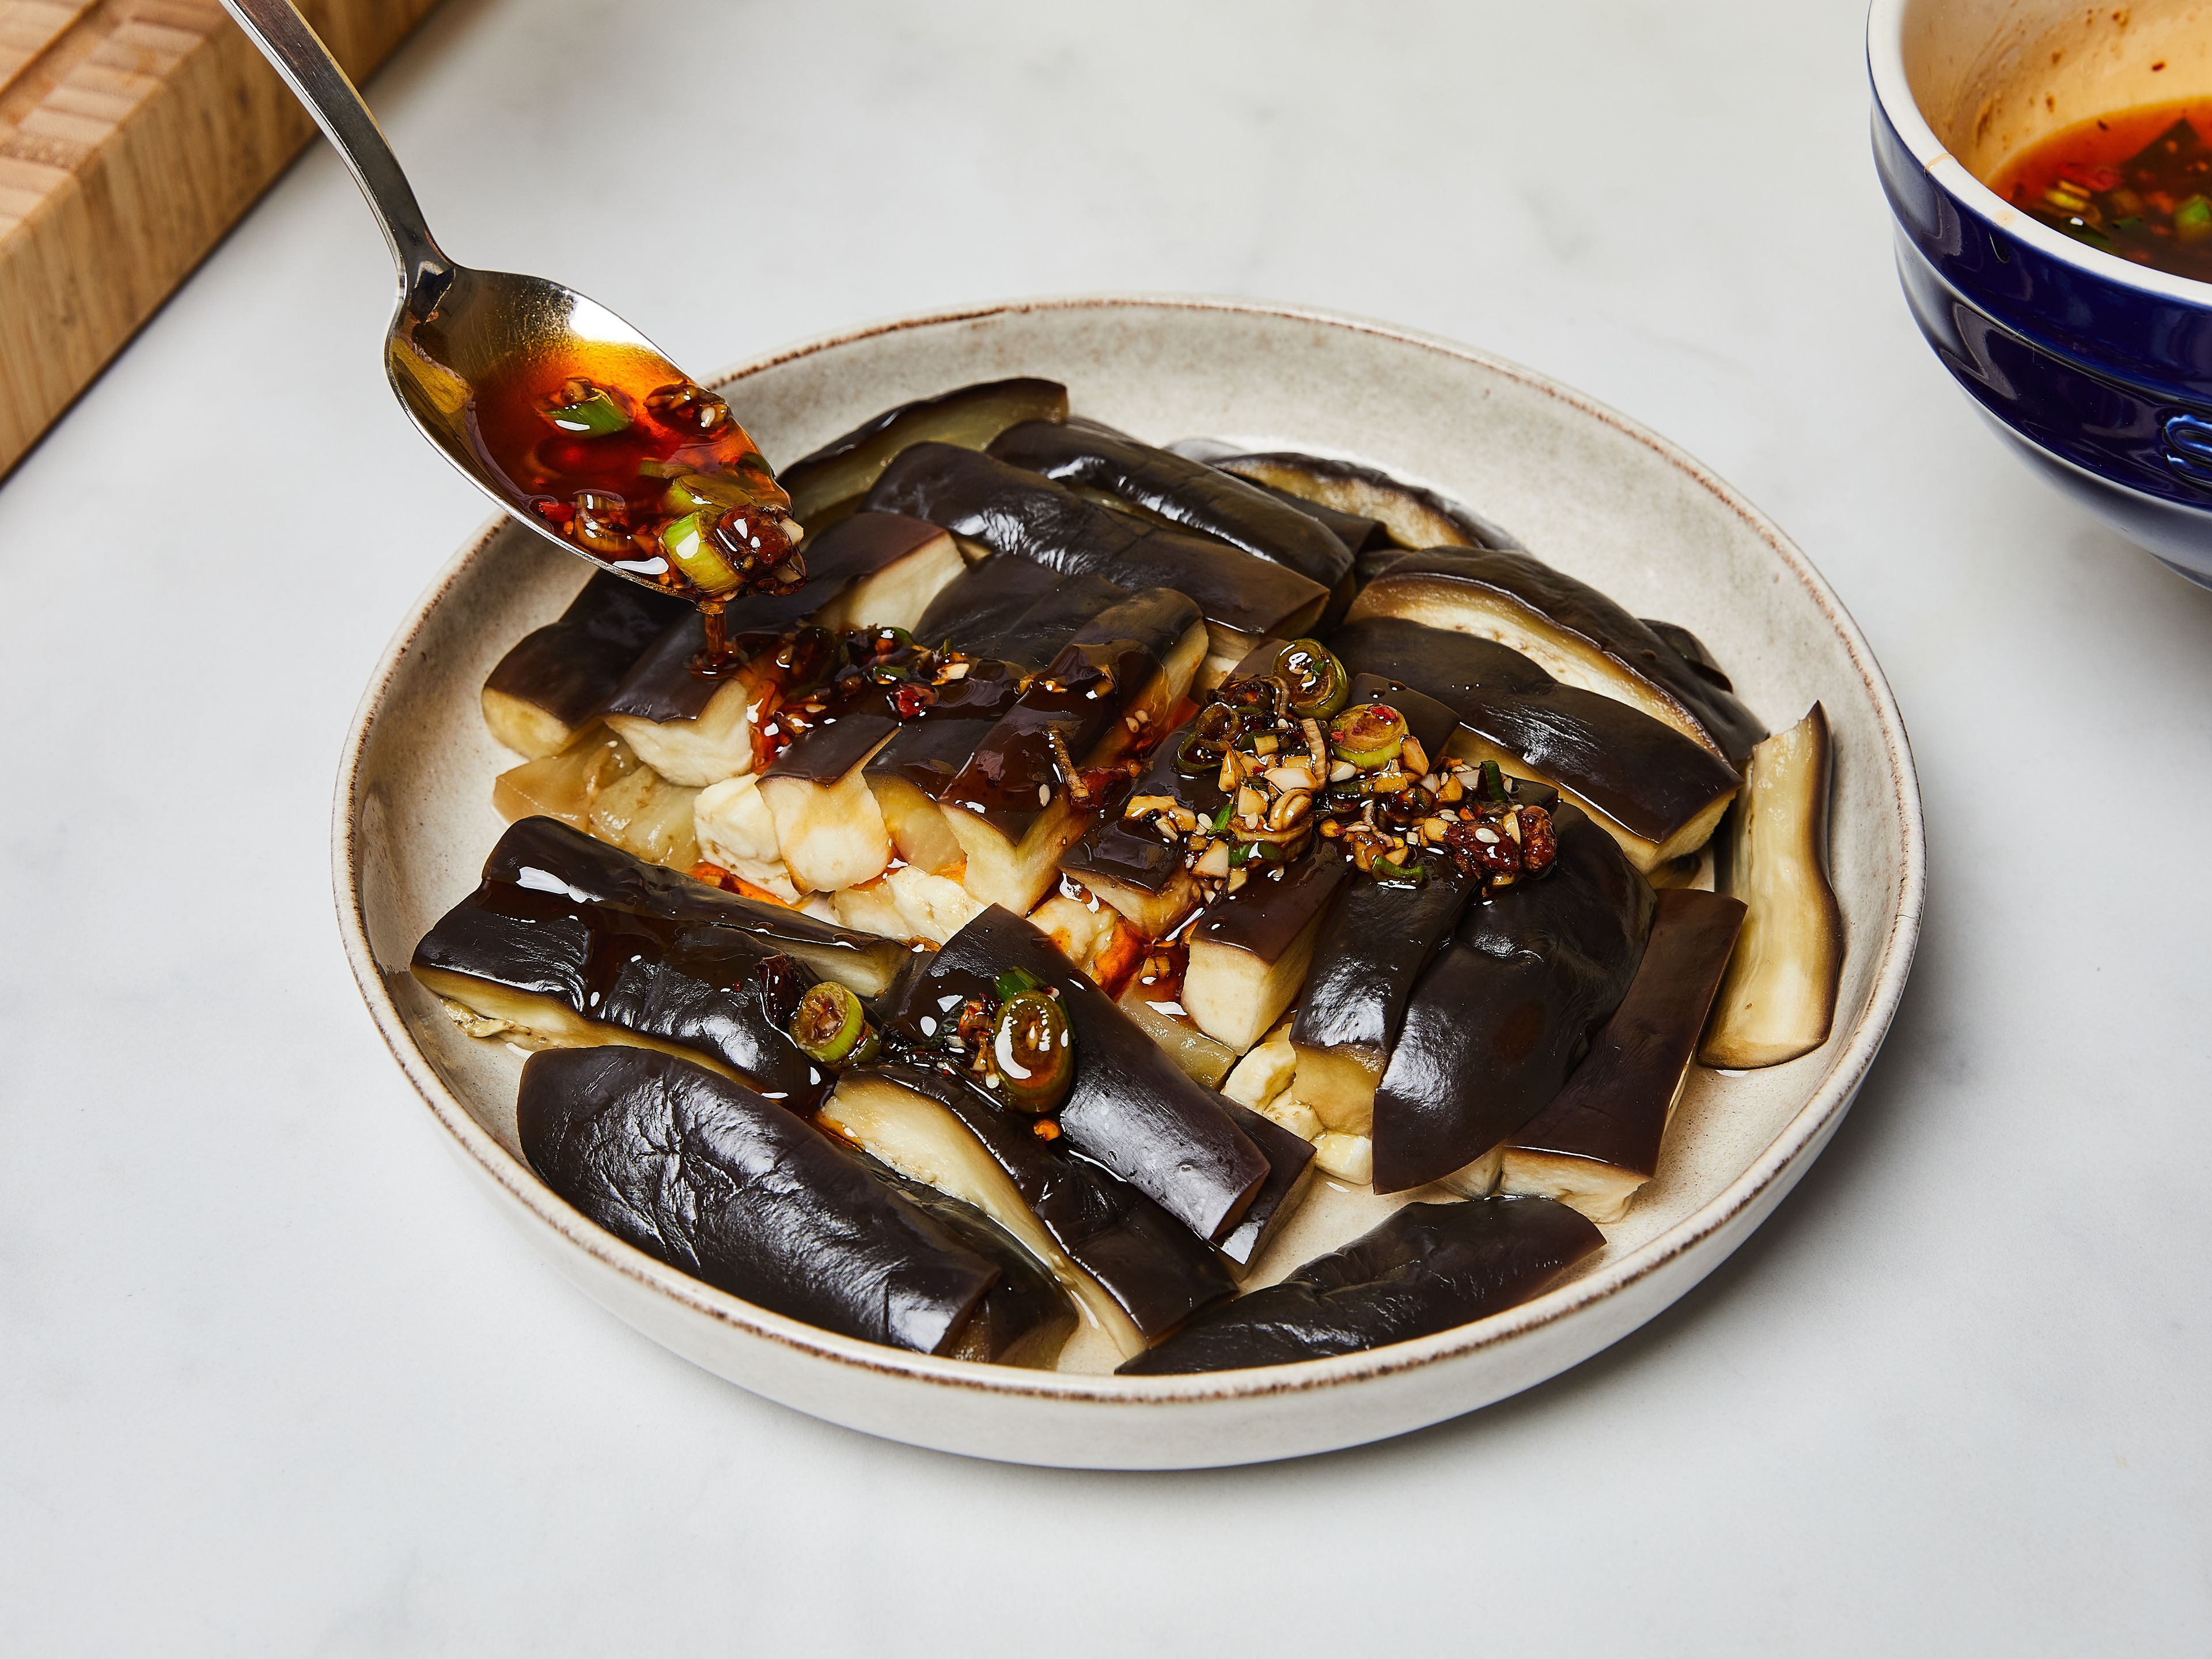 When the eggplant is ready, remove from the steamer basket. Arrange on the serving plate and pour over the sauce. Serve the dish warm, room-temperature or cold, with steamed rice.